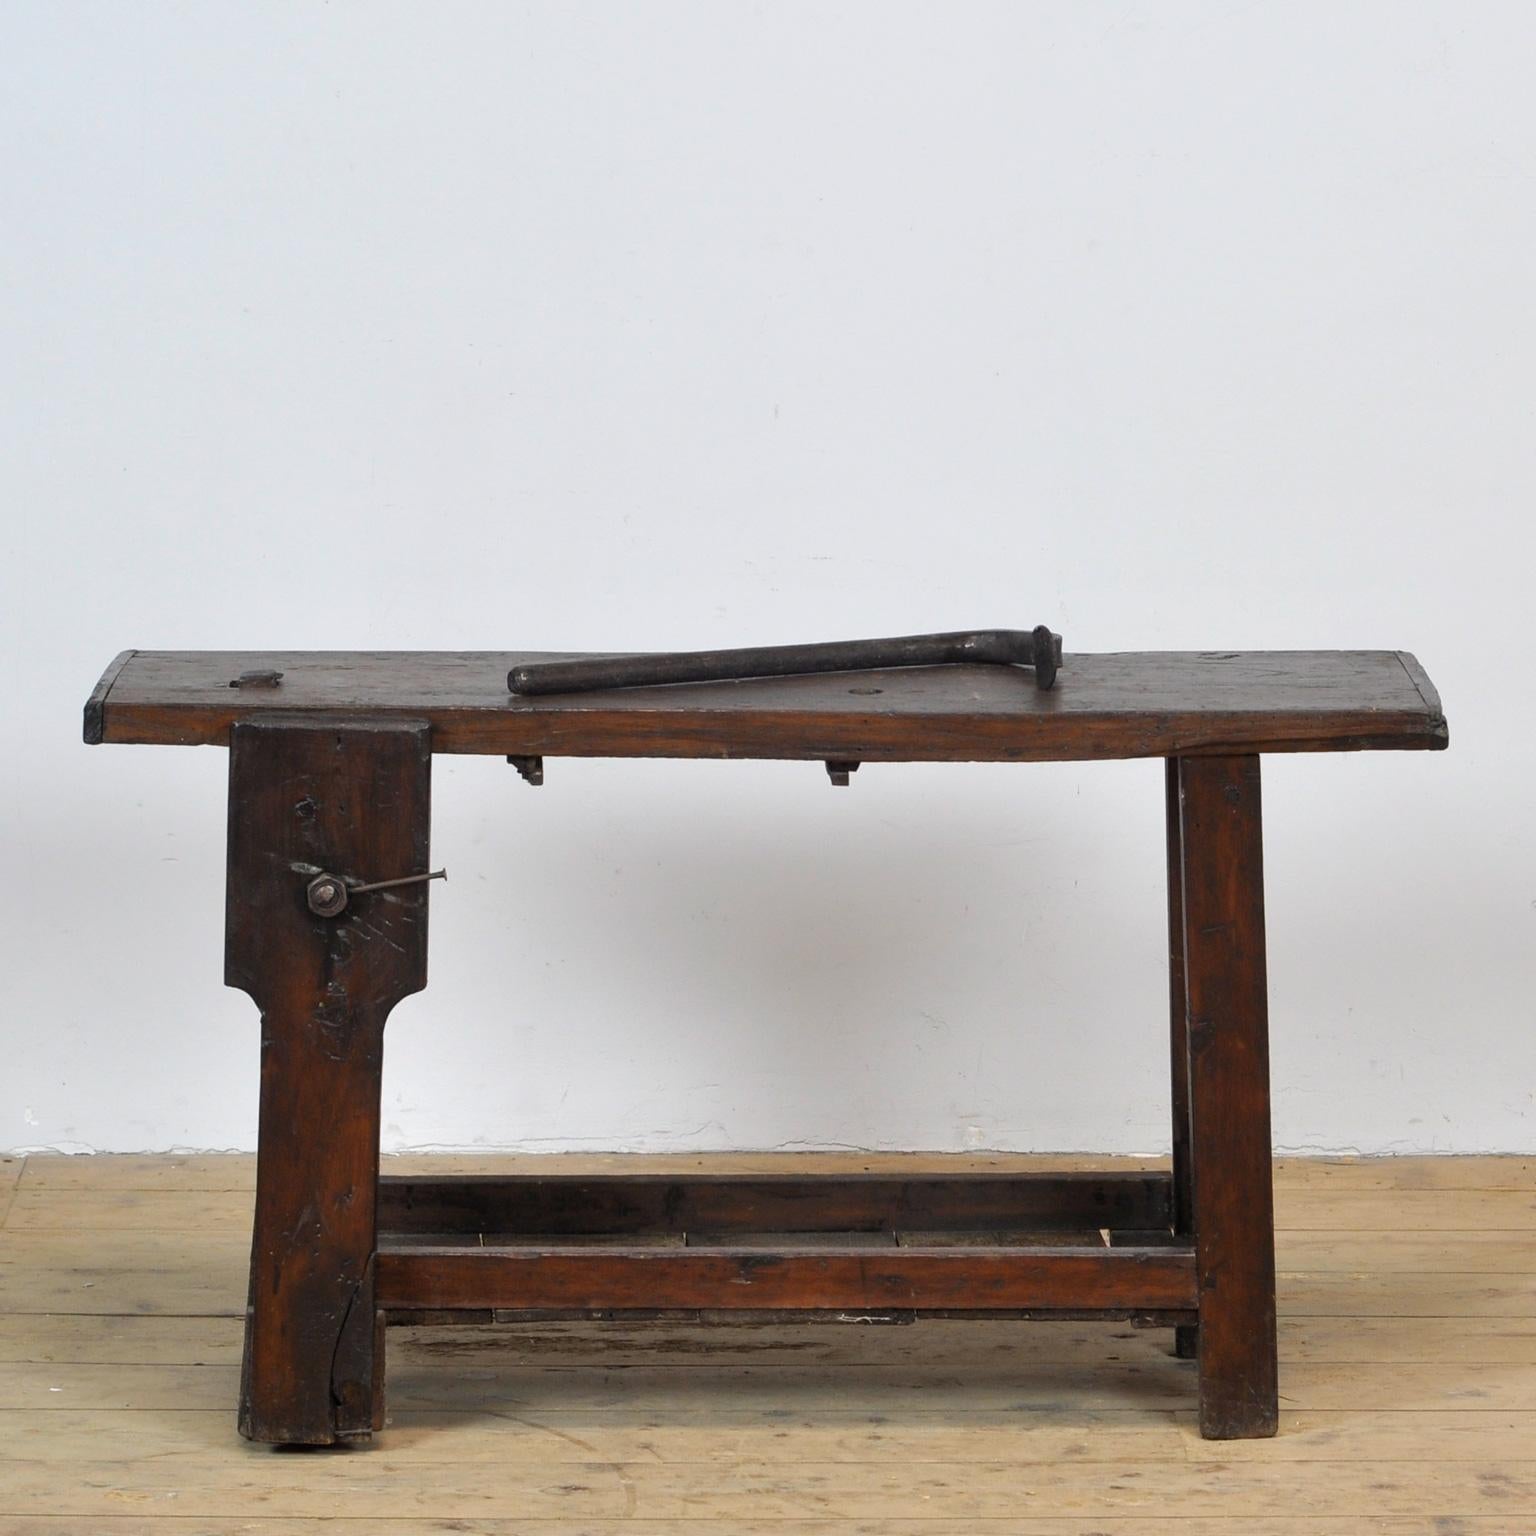 Small workbench circa 1930, made of oak and pine wood. The iron bar was intended to secure items. Of course it can also be used as a bench.